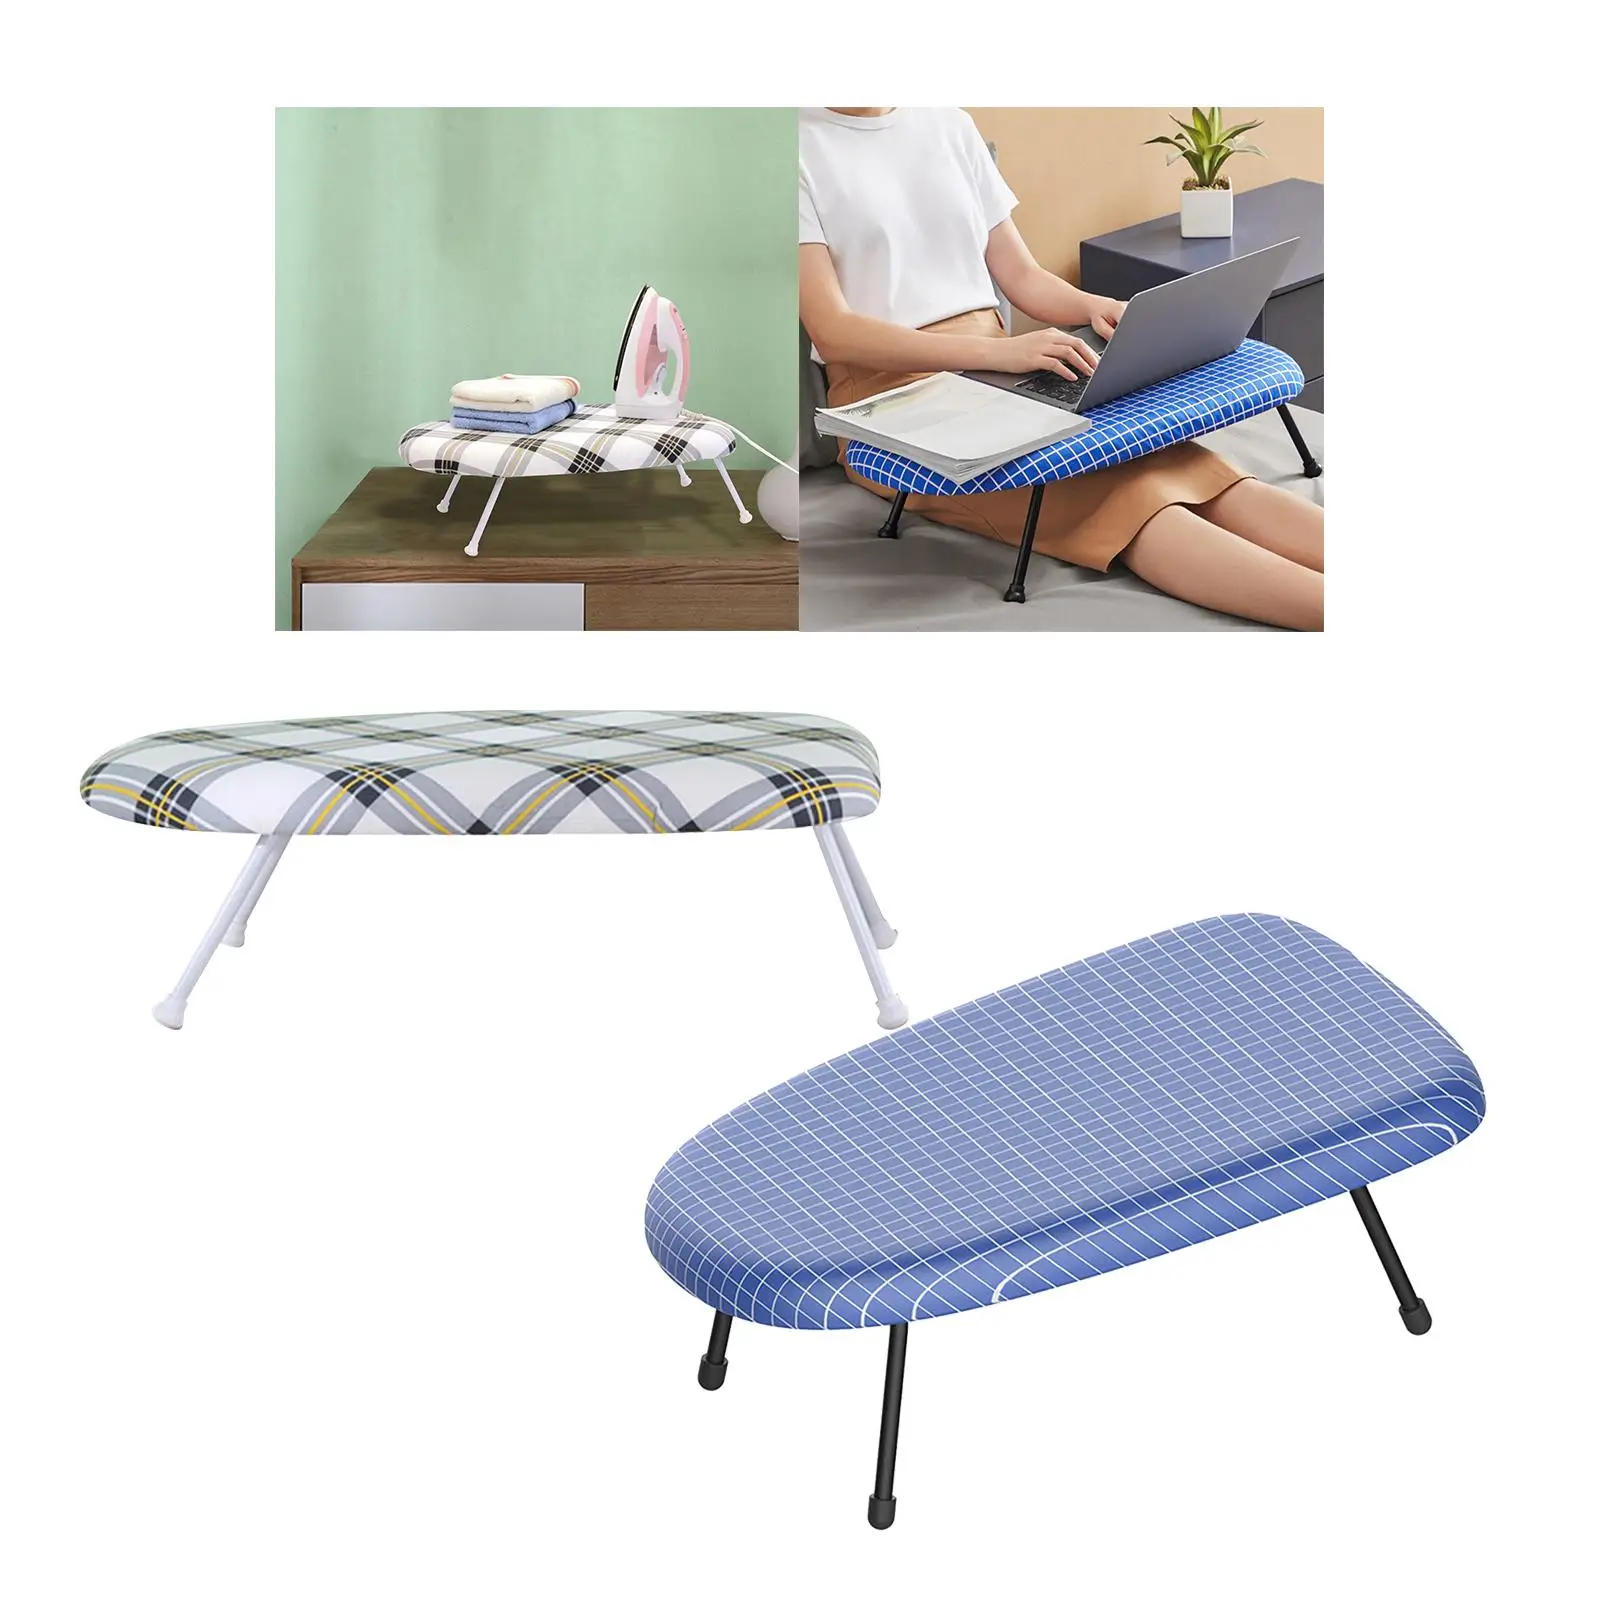 Mini Ironing Board for Ironing Cuffs Shirt Neckline Sleeves Foldable Countertop Ironing Board for Apartment Dorm Laundry Home